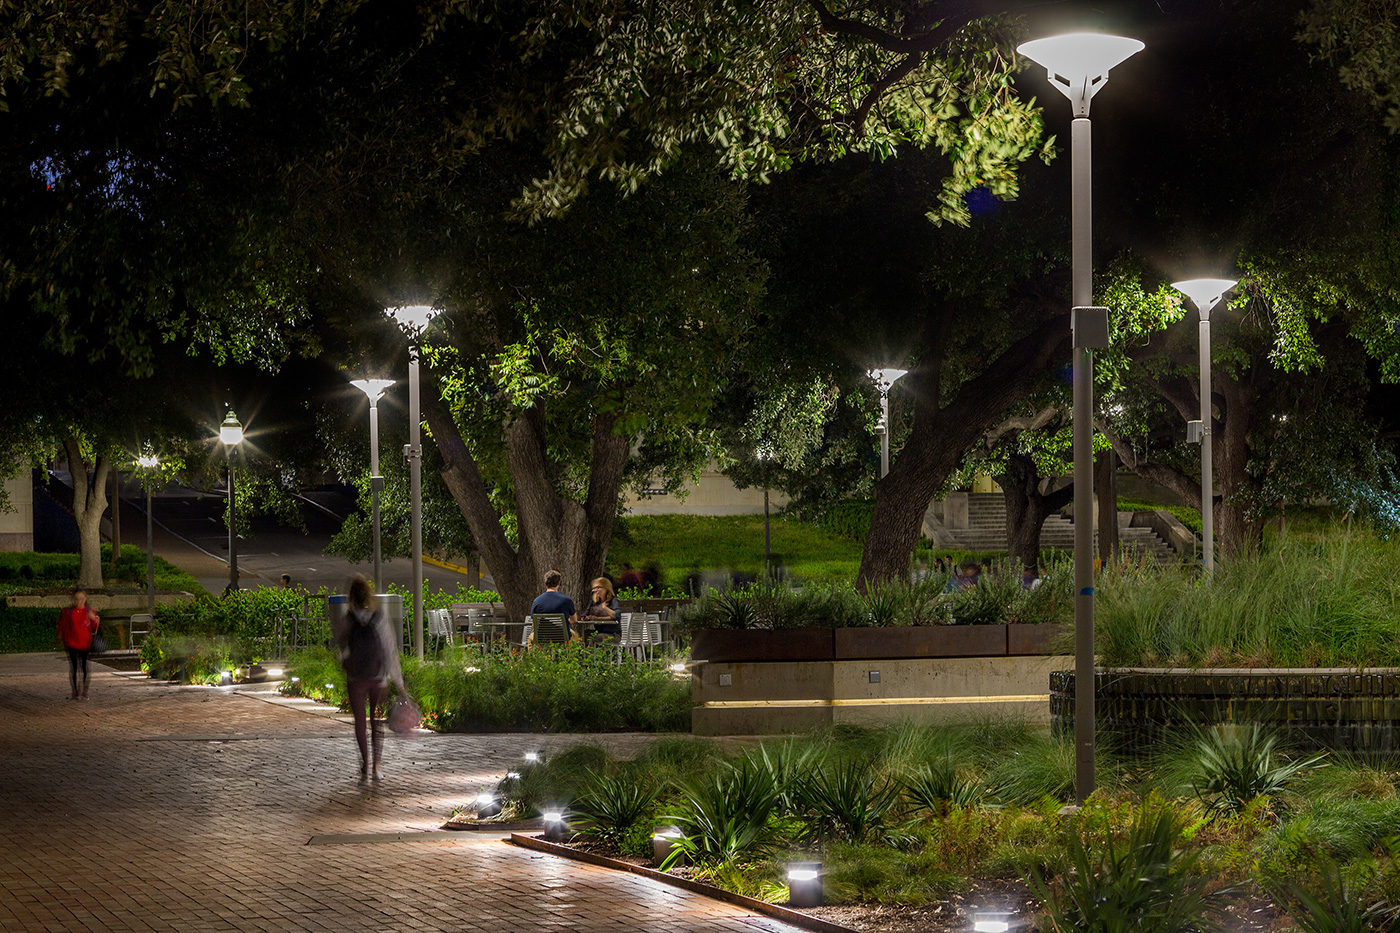 A college walking path lit at night.